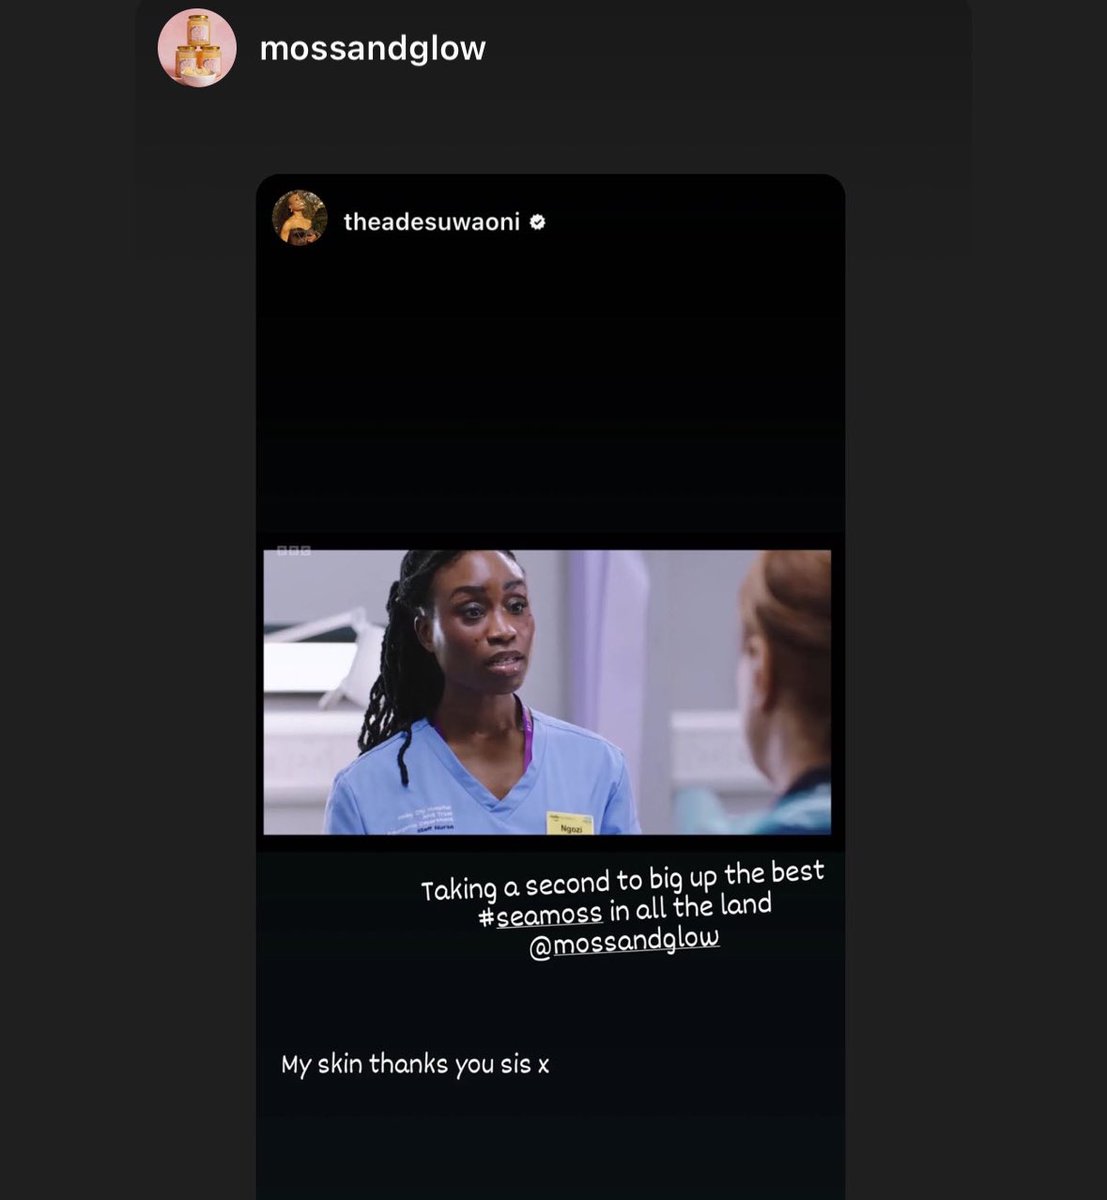 Thank you for the shout out @adesuwa_oni our @BBCCasualty star! Keep Glowing on our screens, couldn’t be prouder of you! 😍♥️🎬 #SeaMoss #GlowingSkin #InsideOut #MossandGlow